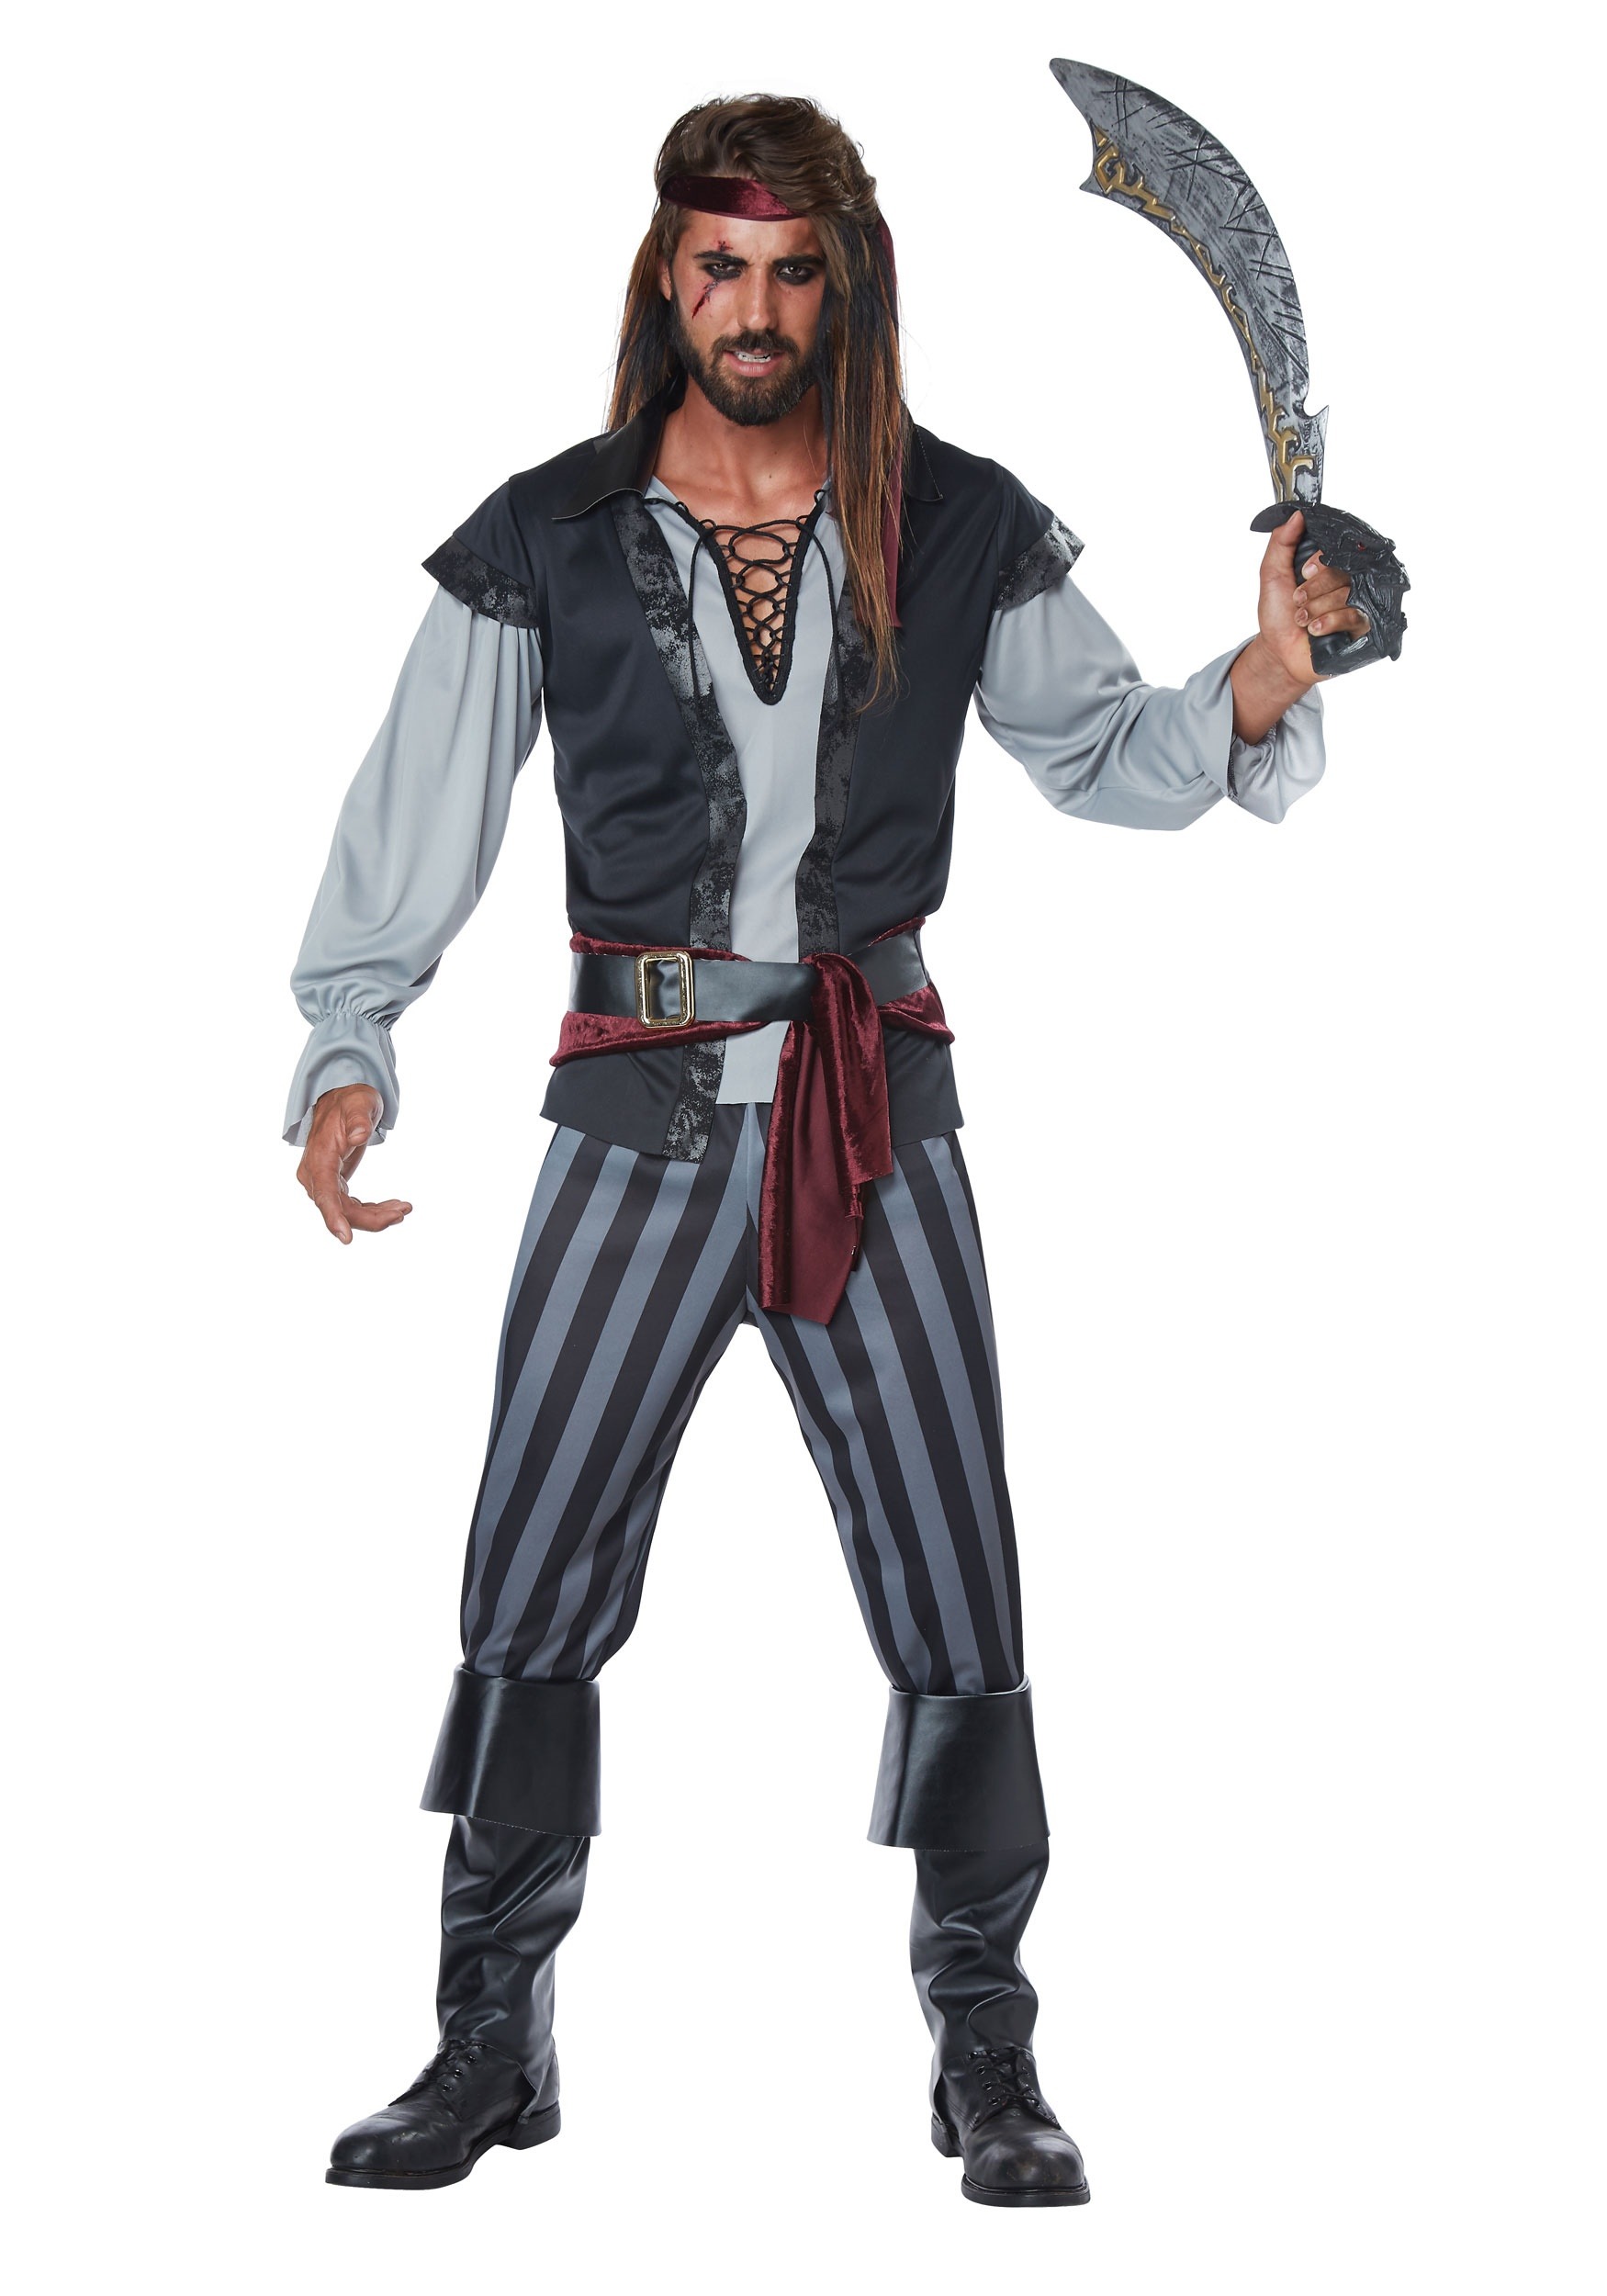 Scallywag Pirate Costume For Men 0144